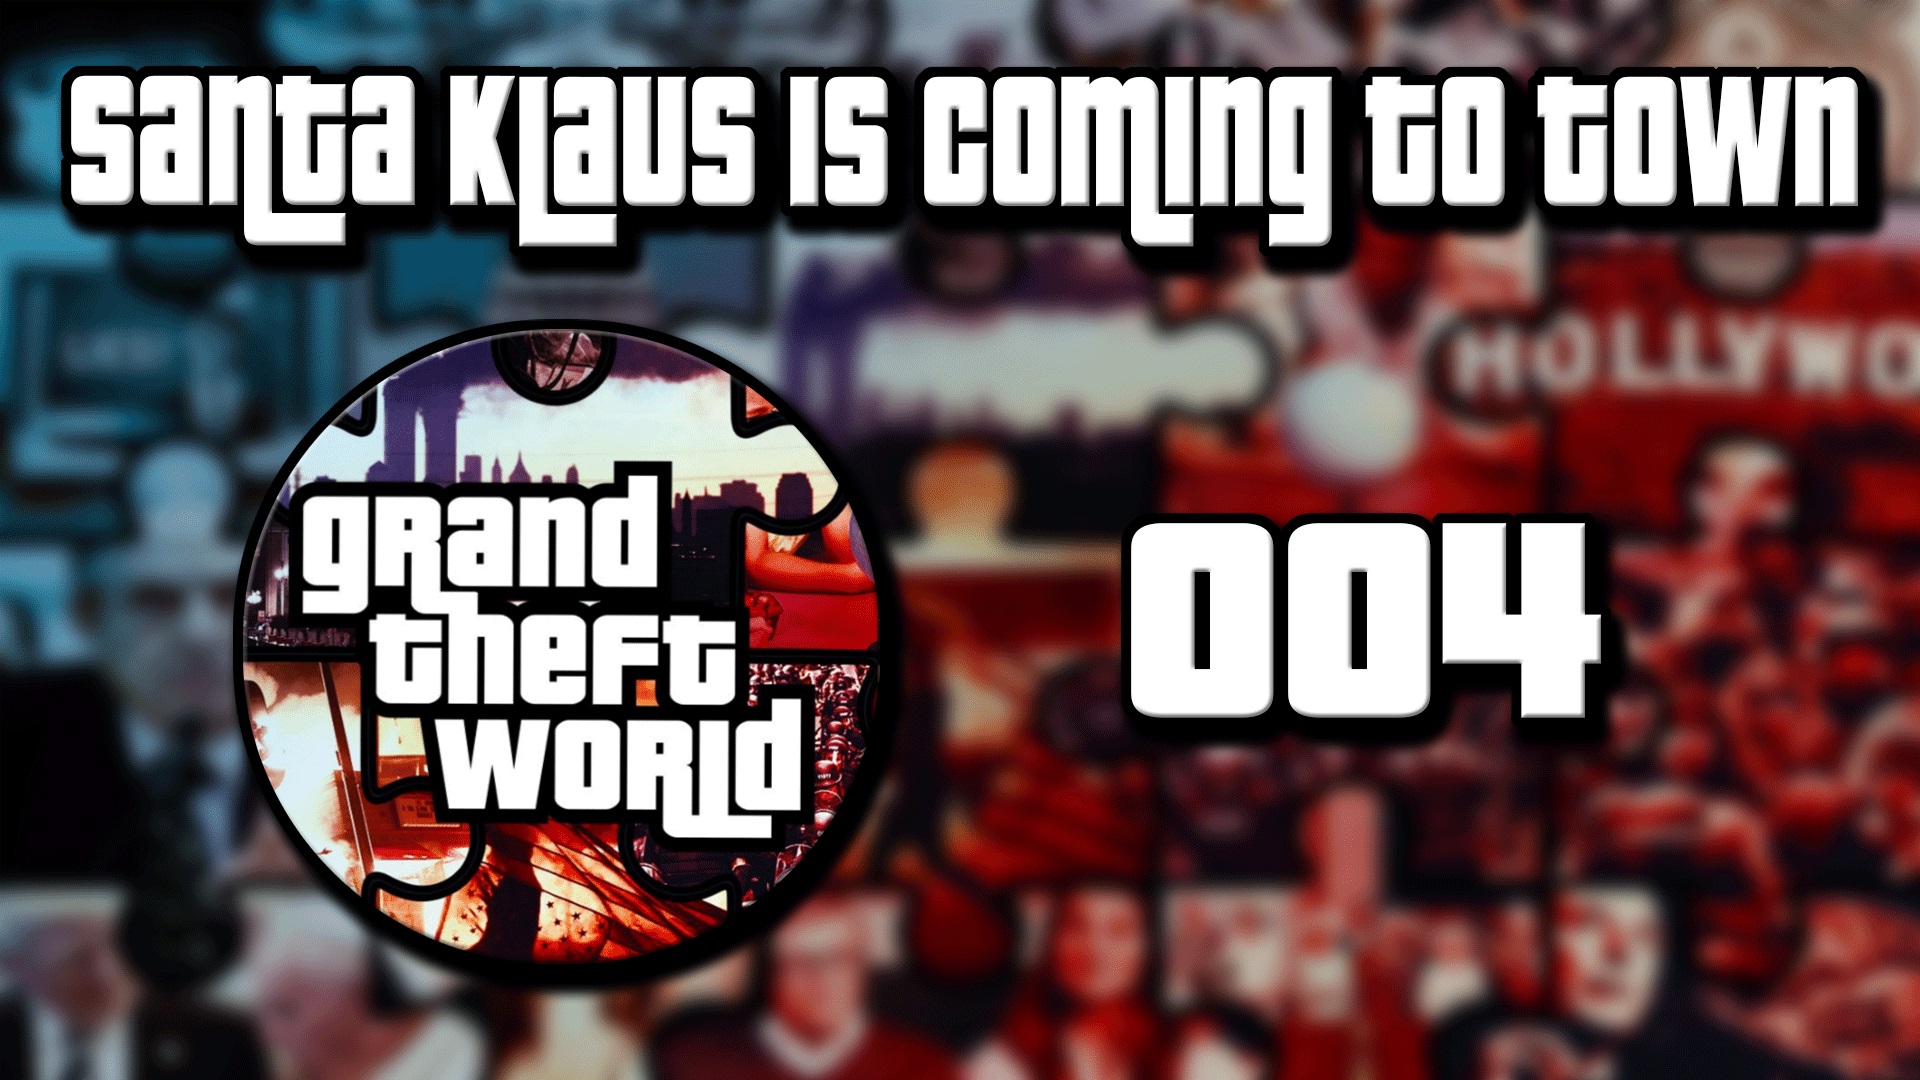 Grand Theft World Podcast 004 | Santa Klaus is Coming to Town